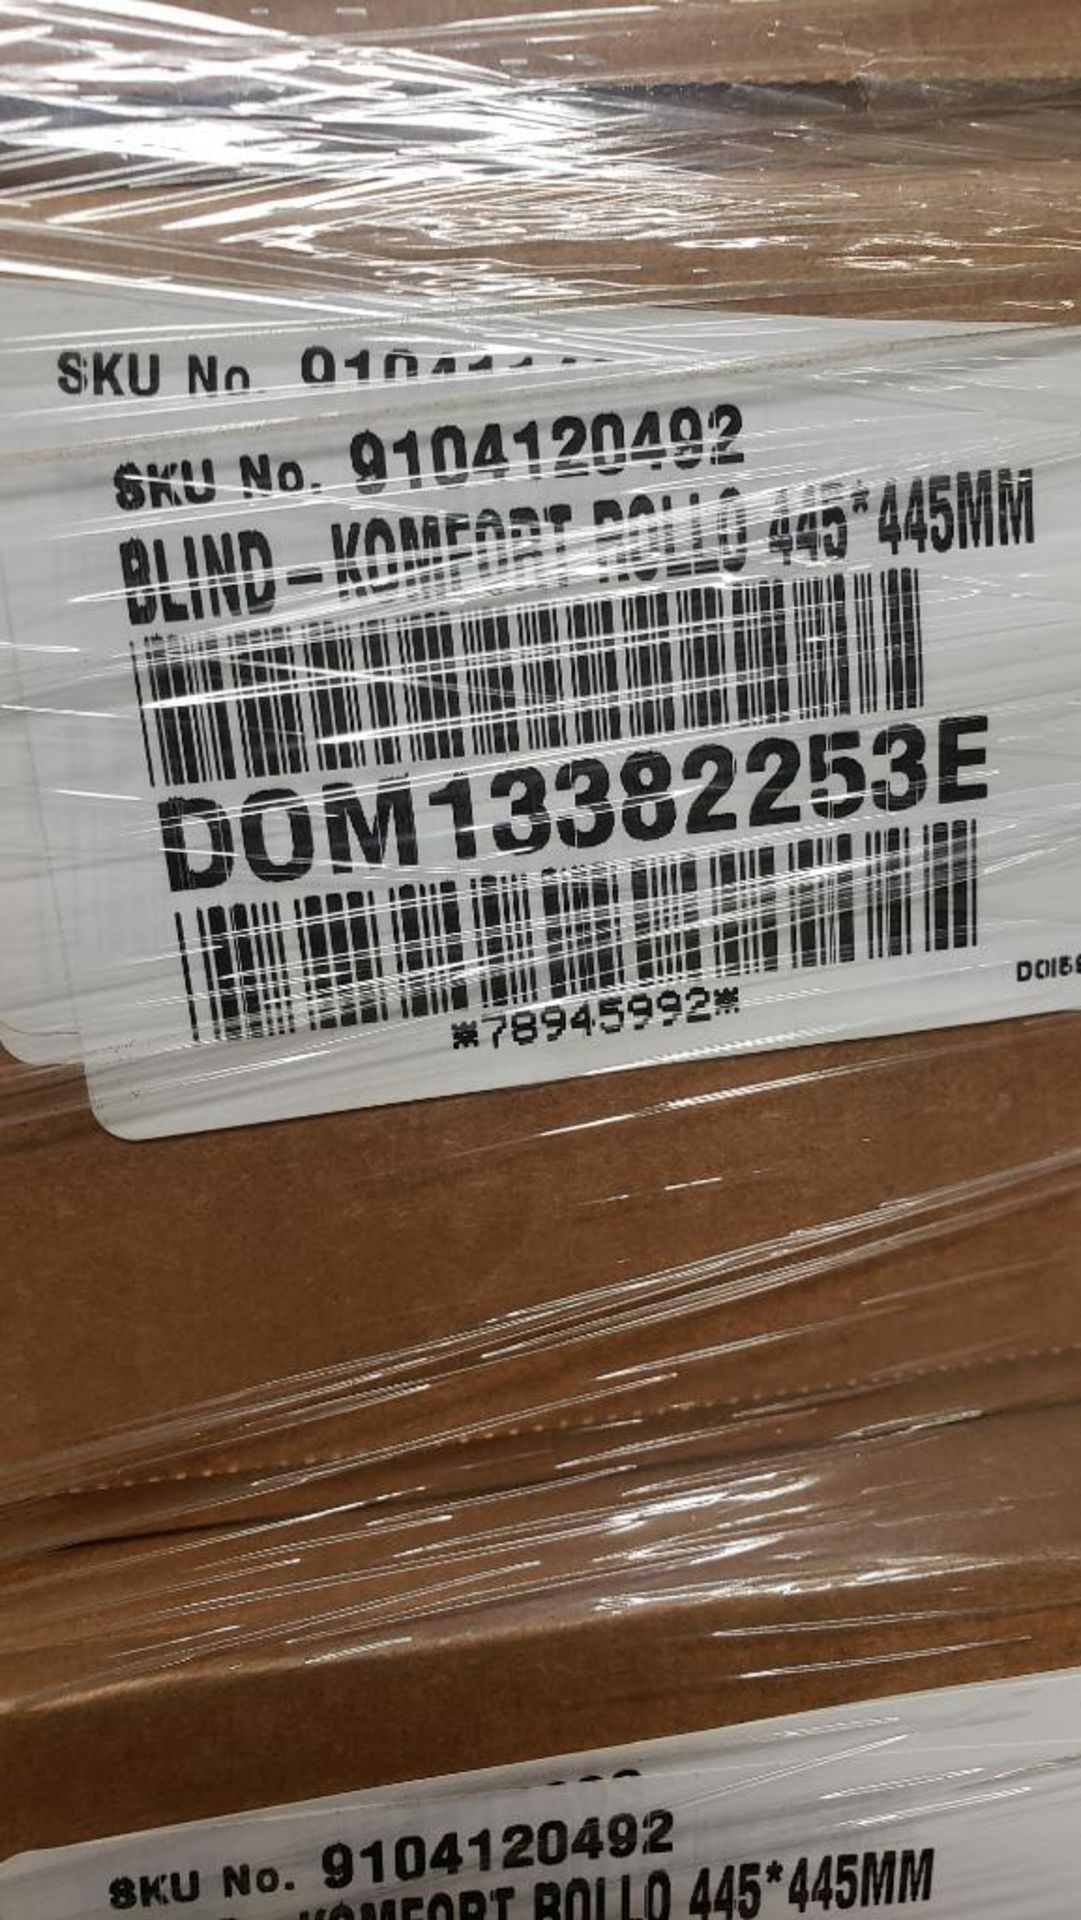 Qty 10 - Dometic rollo blind. Part number DOM13382253E. New in box. - Image 2 of 2